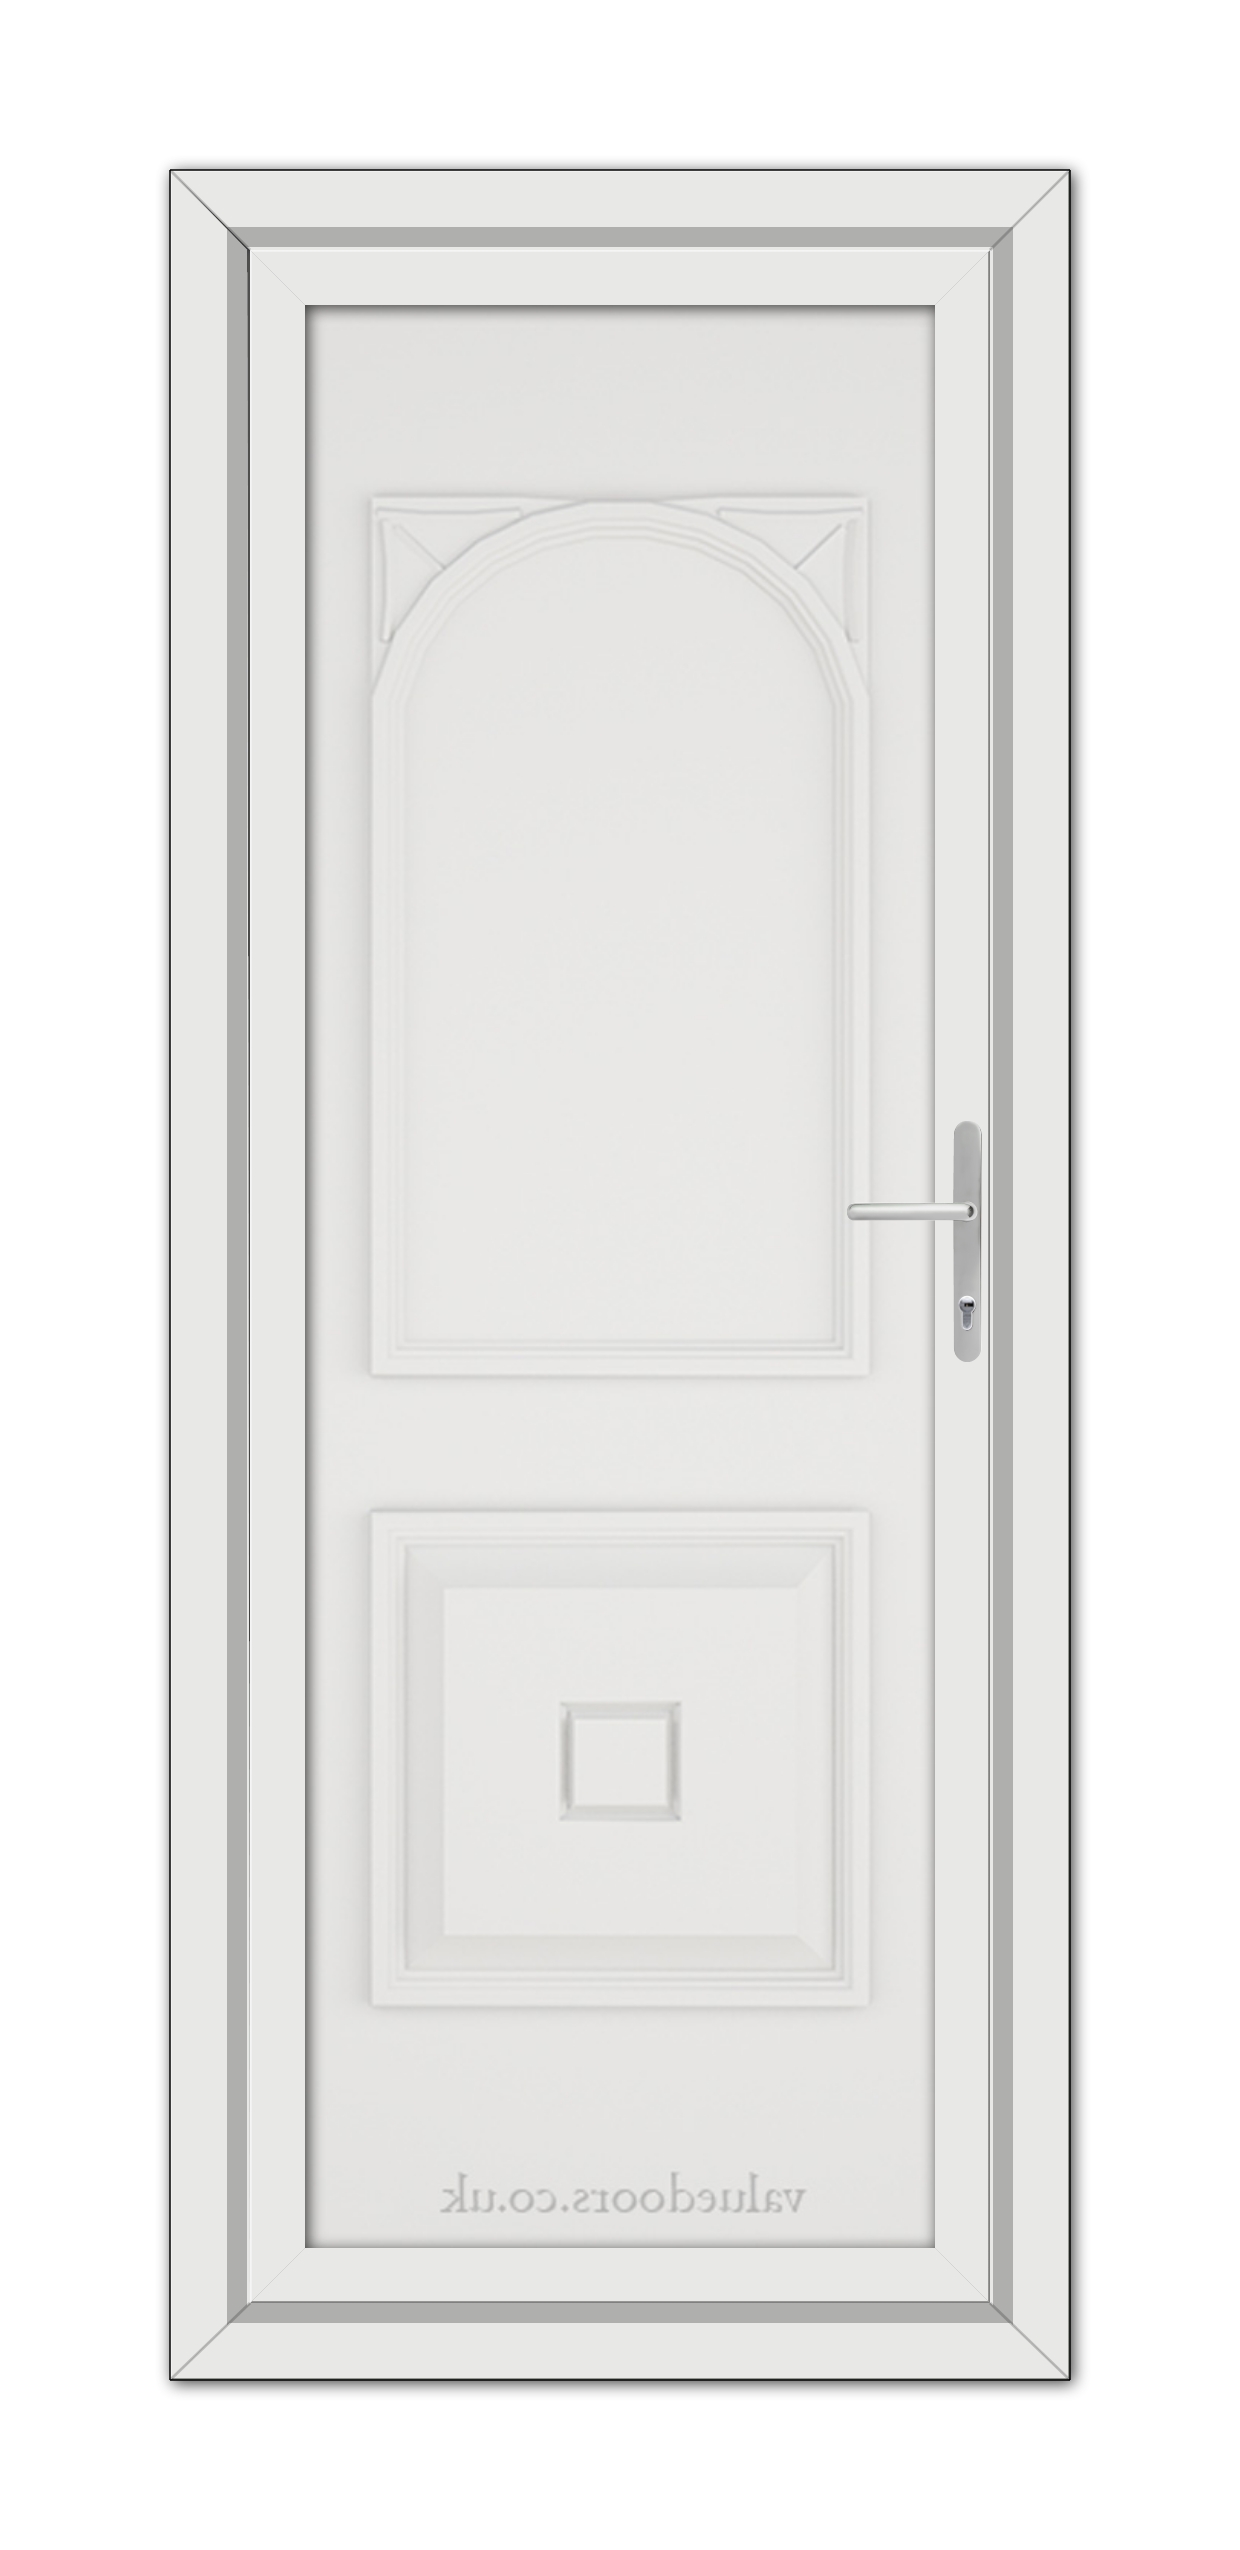 White Reims Solid uPVC door with a handle on the right side, featuring one arched and one rectangular embossed panel, set within a frame.